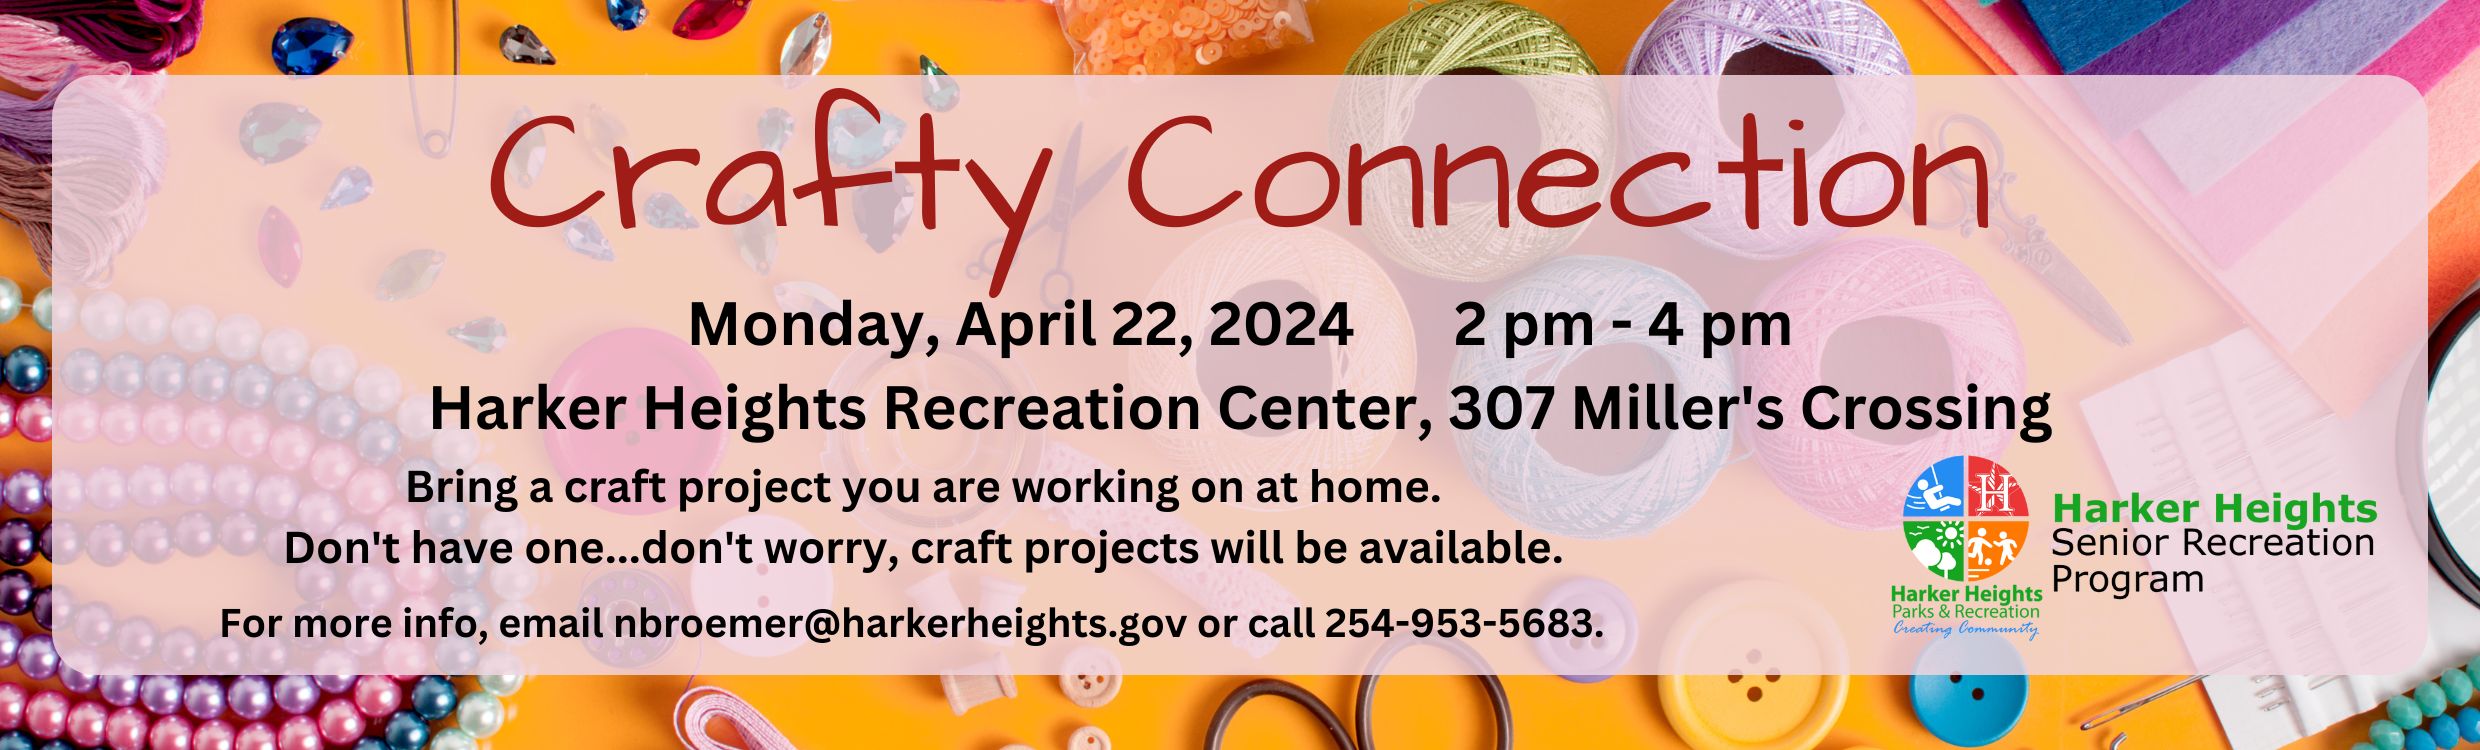 Crafty Connection April 2024